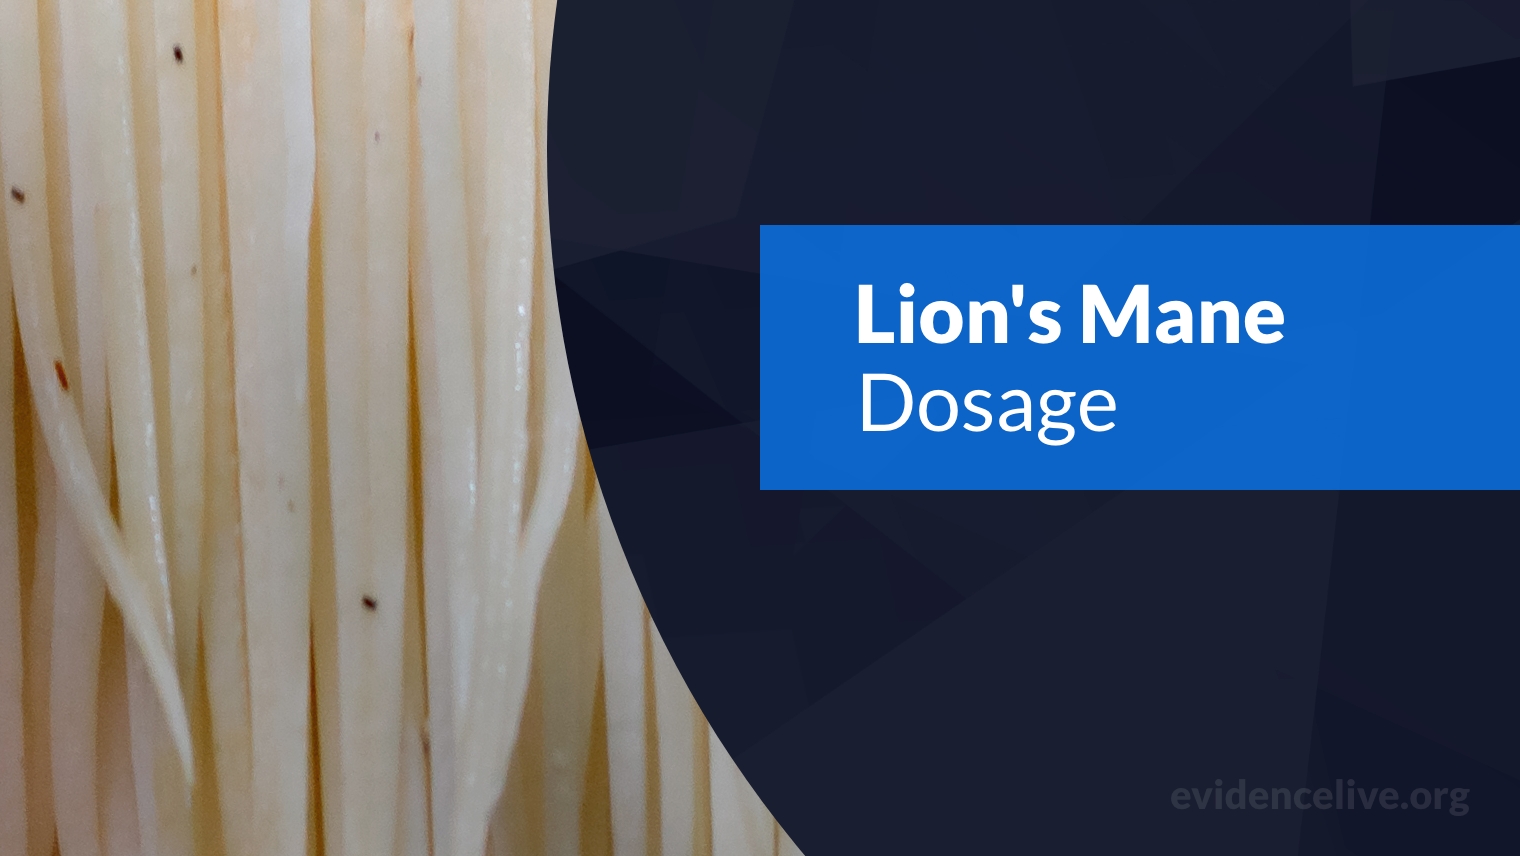 Lion’s Mane Dosage: When To Take And How Much?